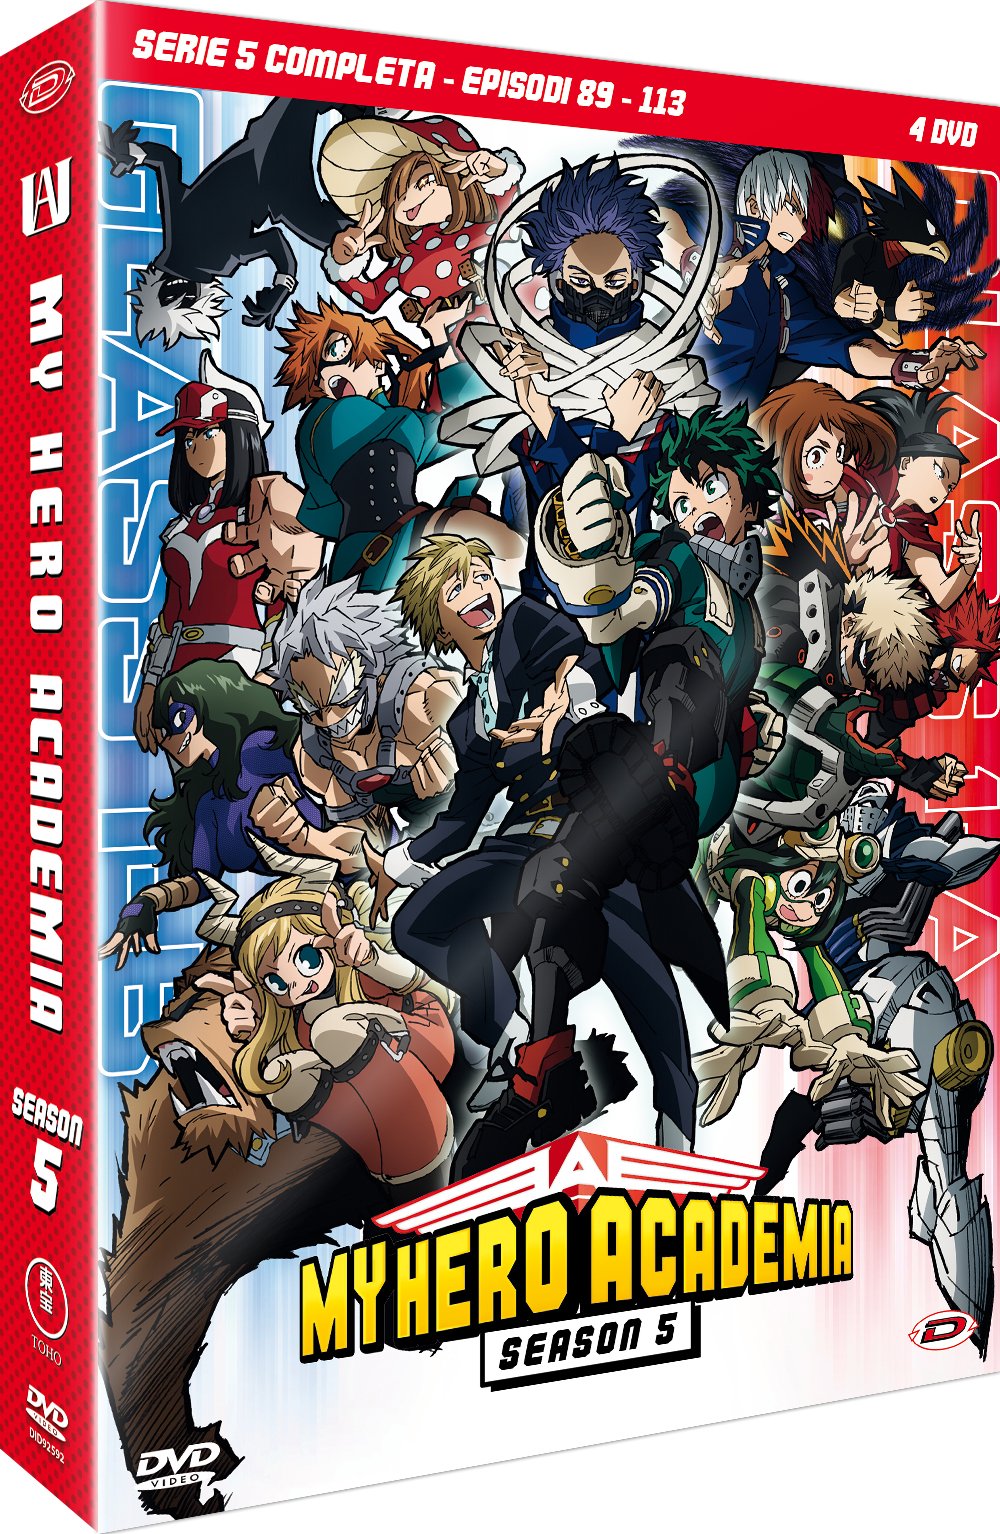 MY HERO ACADEMIA THE COMPLETE SERIES DVD STAGIONE 5 (EP 89-113) (4 DVD)